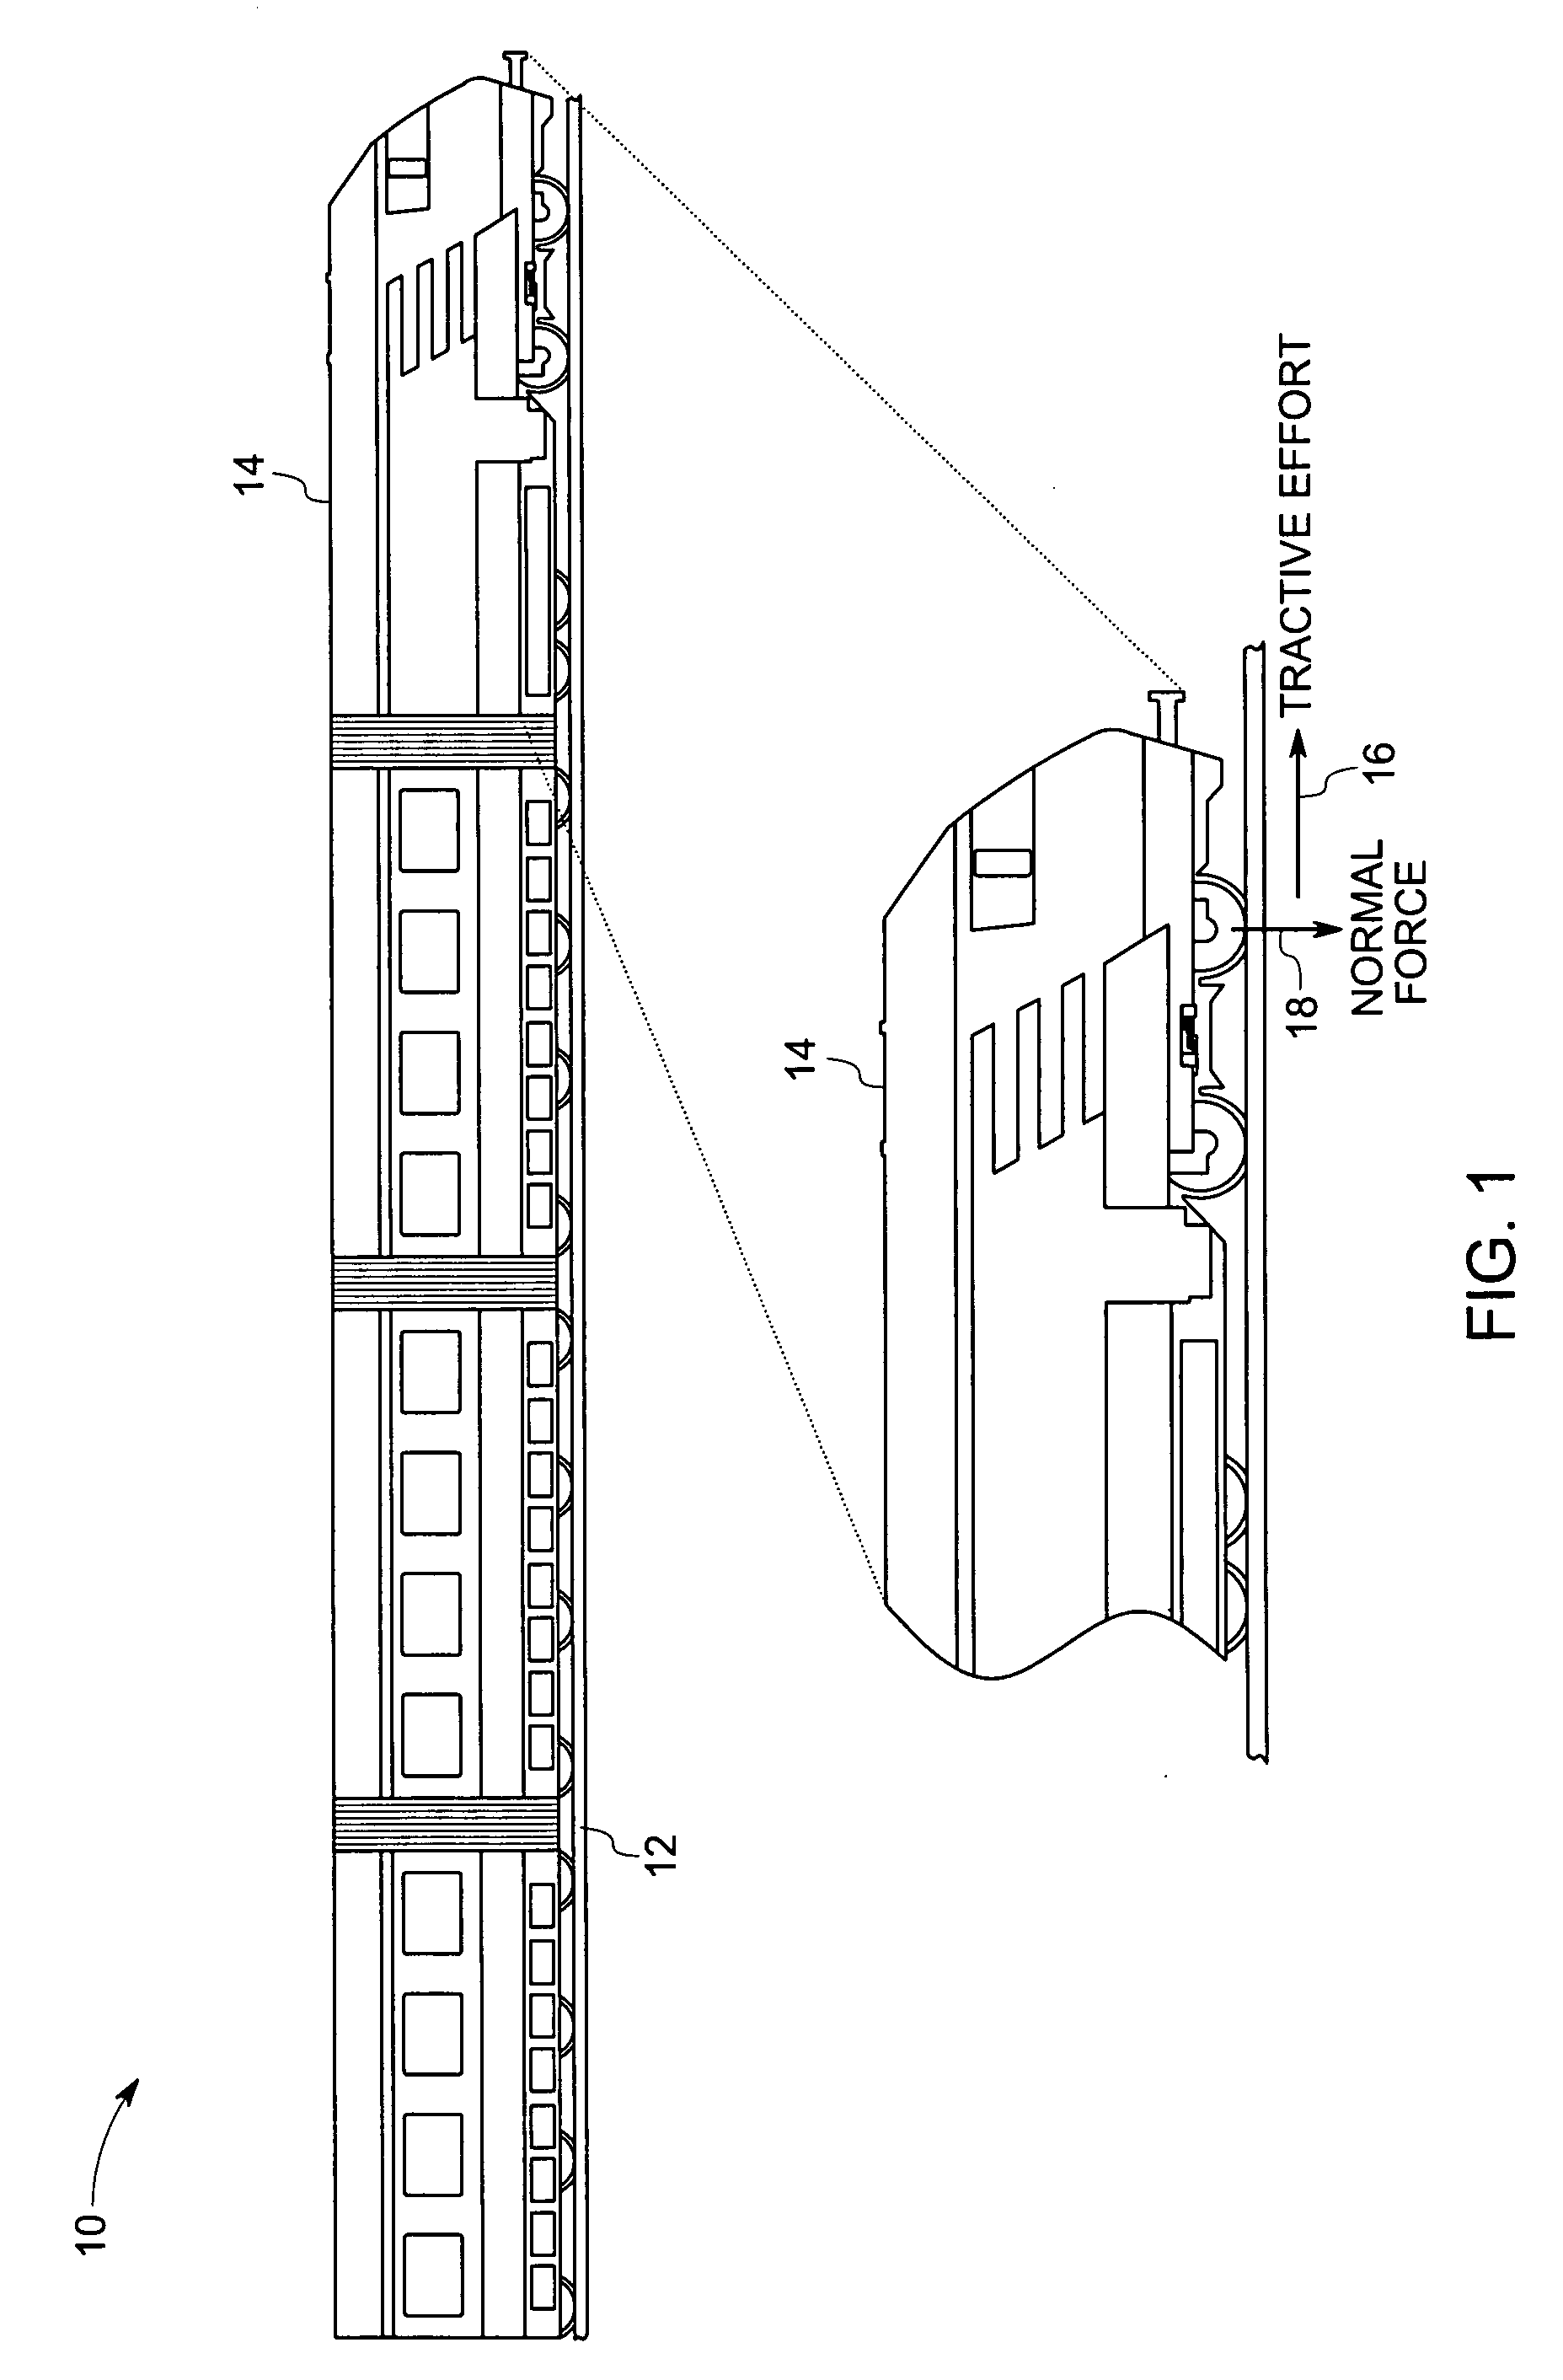 System and method for locomotive adhesion control